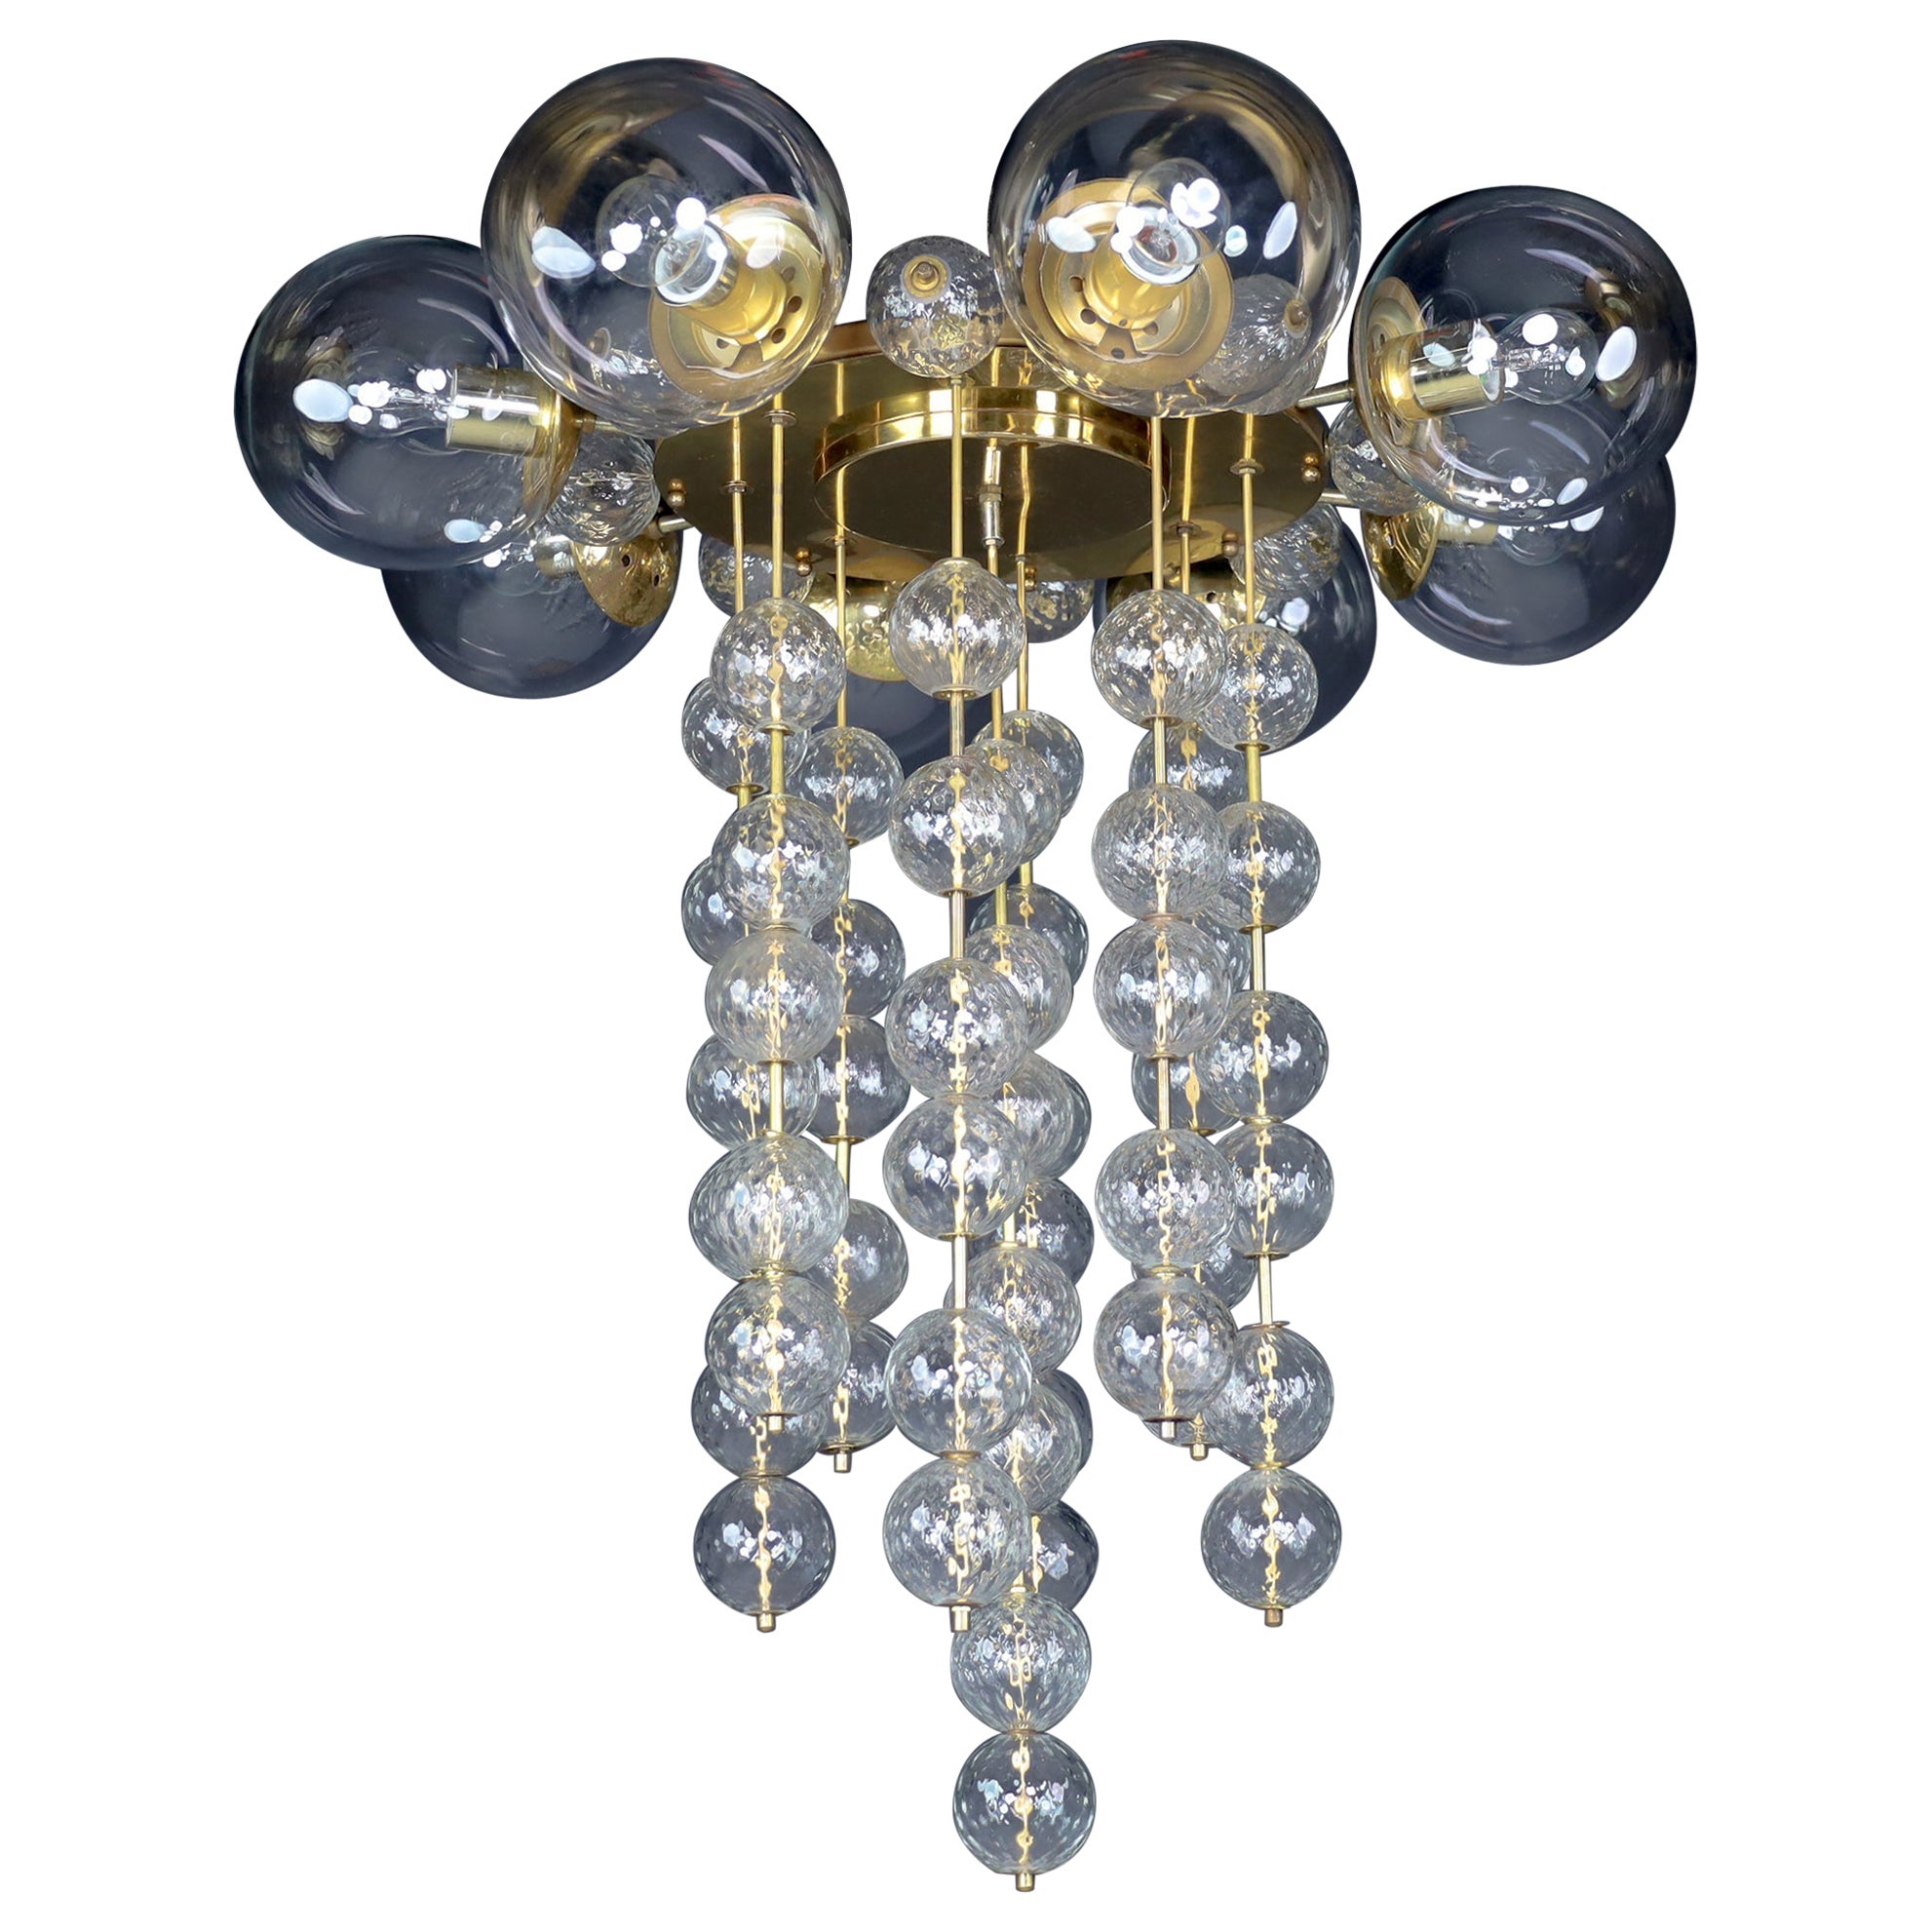 Grand Chandelier with Brass Fixture and Hand-blowed Glass Globes, 1960s